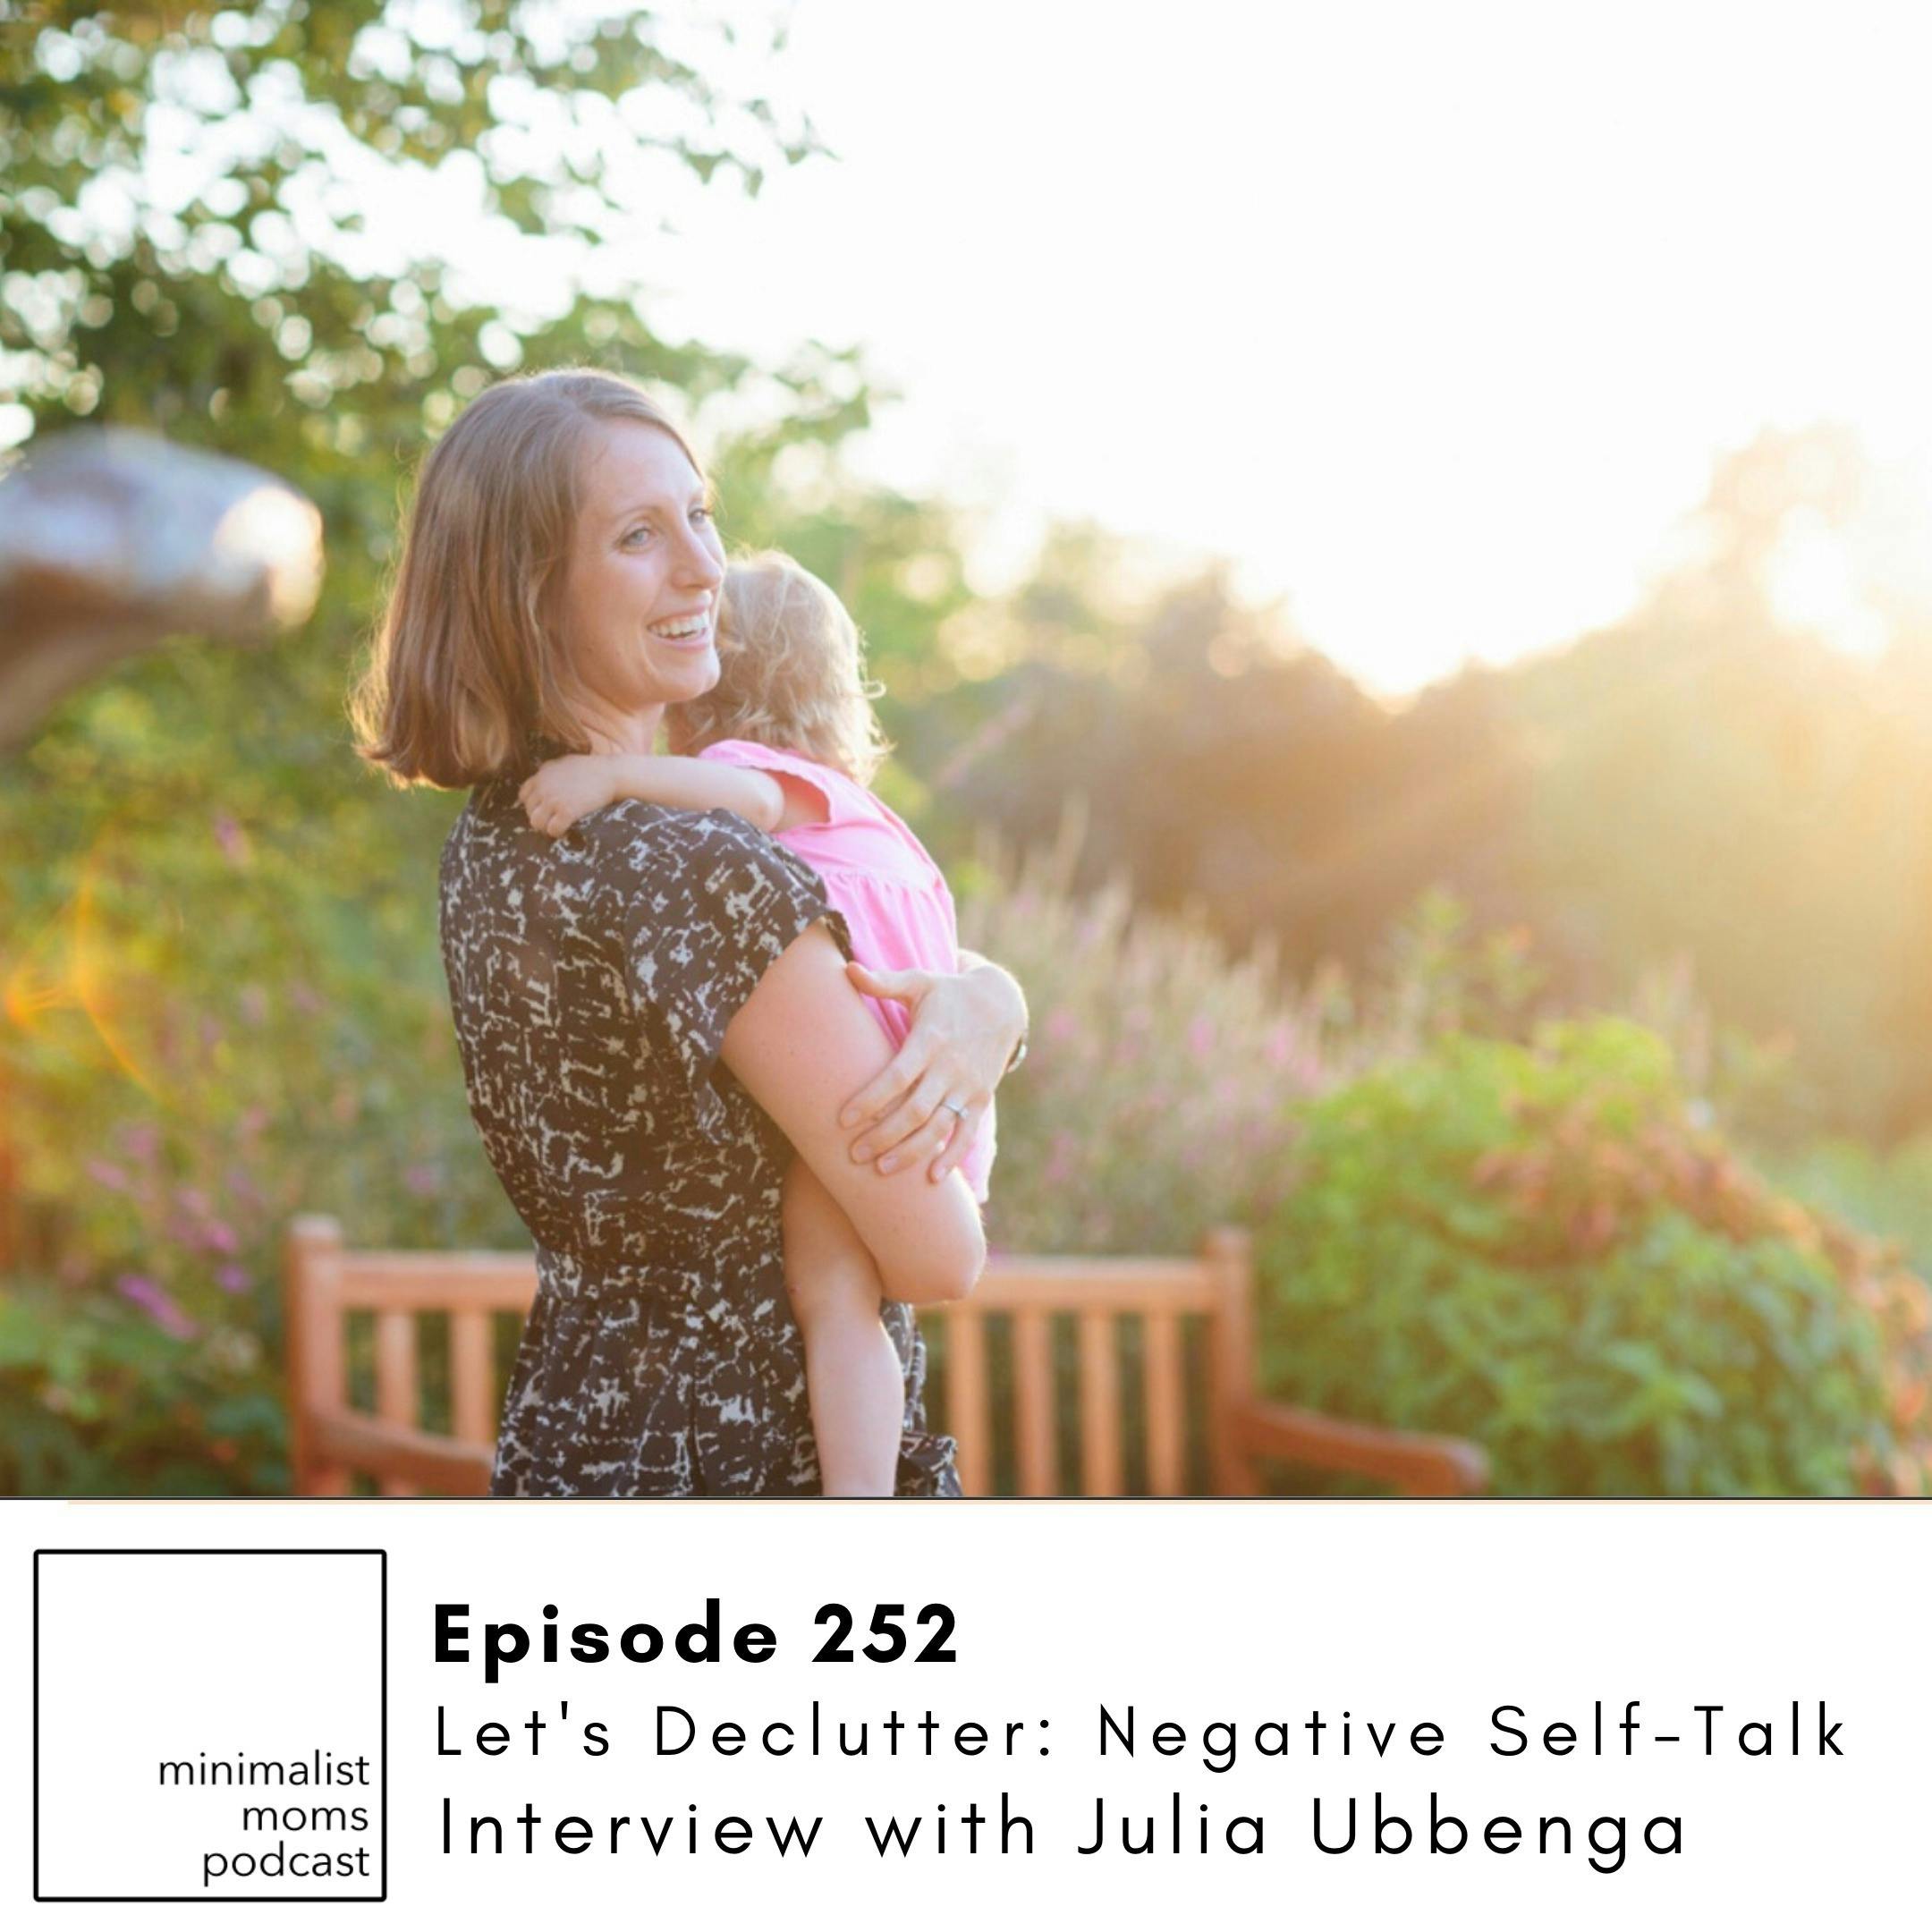 EP252: Let's Declutter: Negative Self-Talk with Julia Ubbenga